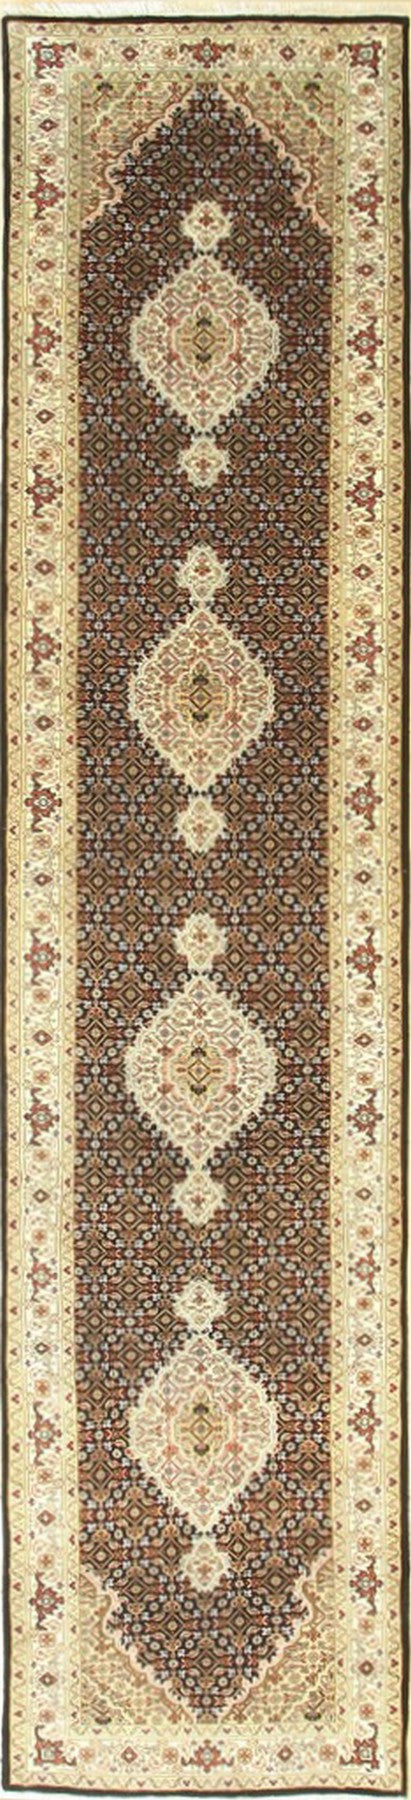 Black/Red Hand Knotted Wool Traditional Mahi Tabriz Rug, Made in India